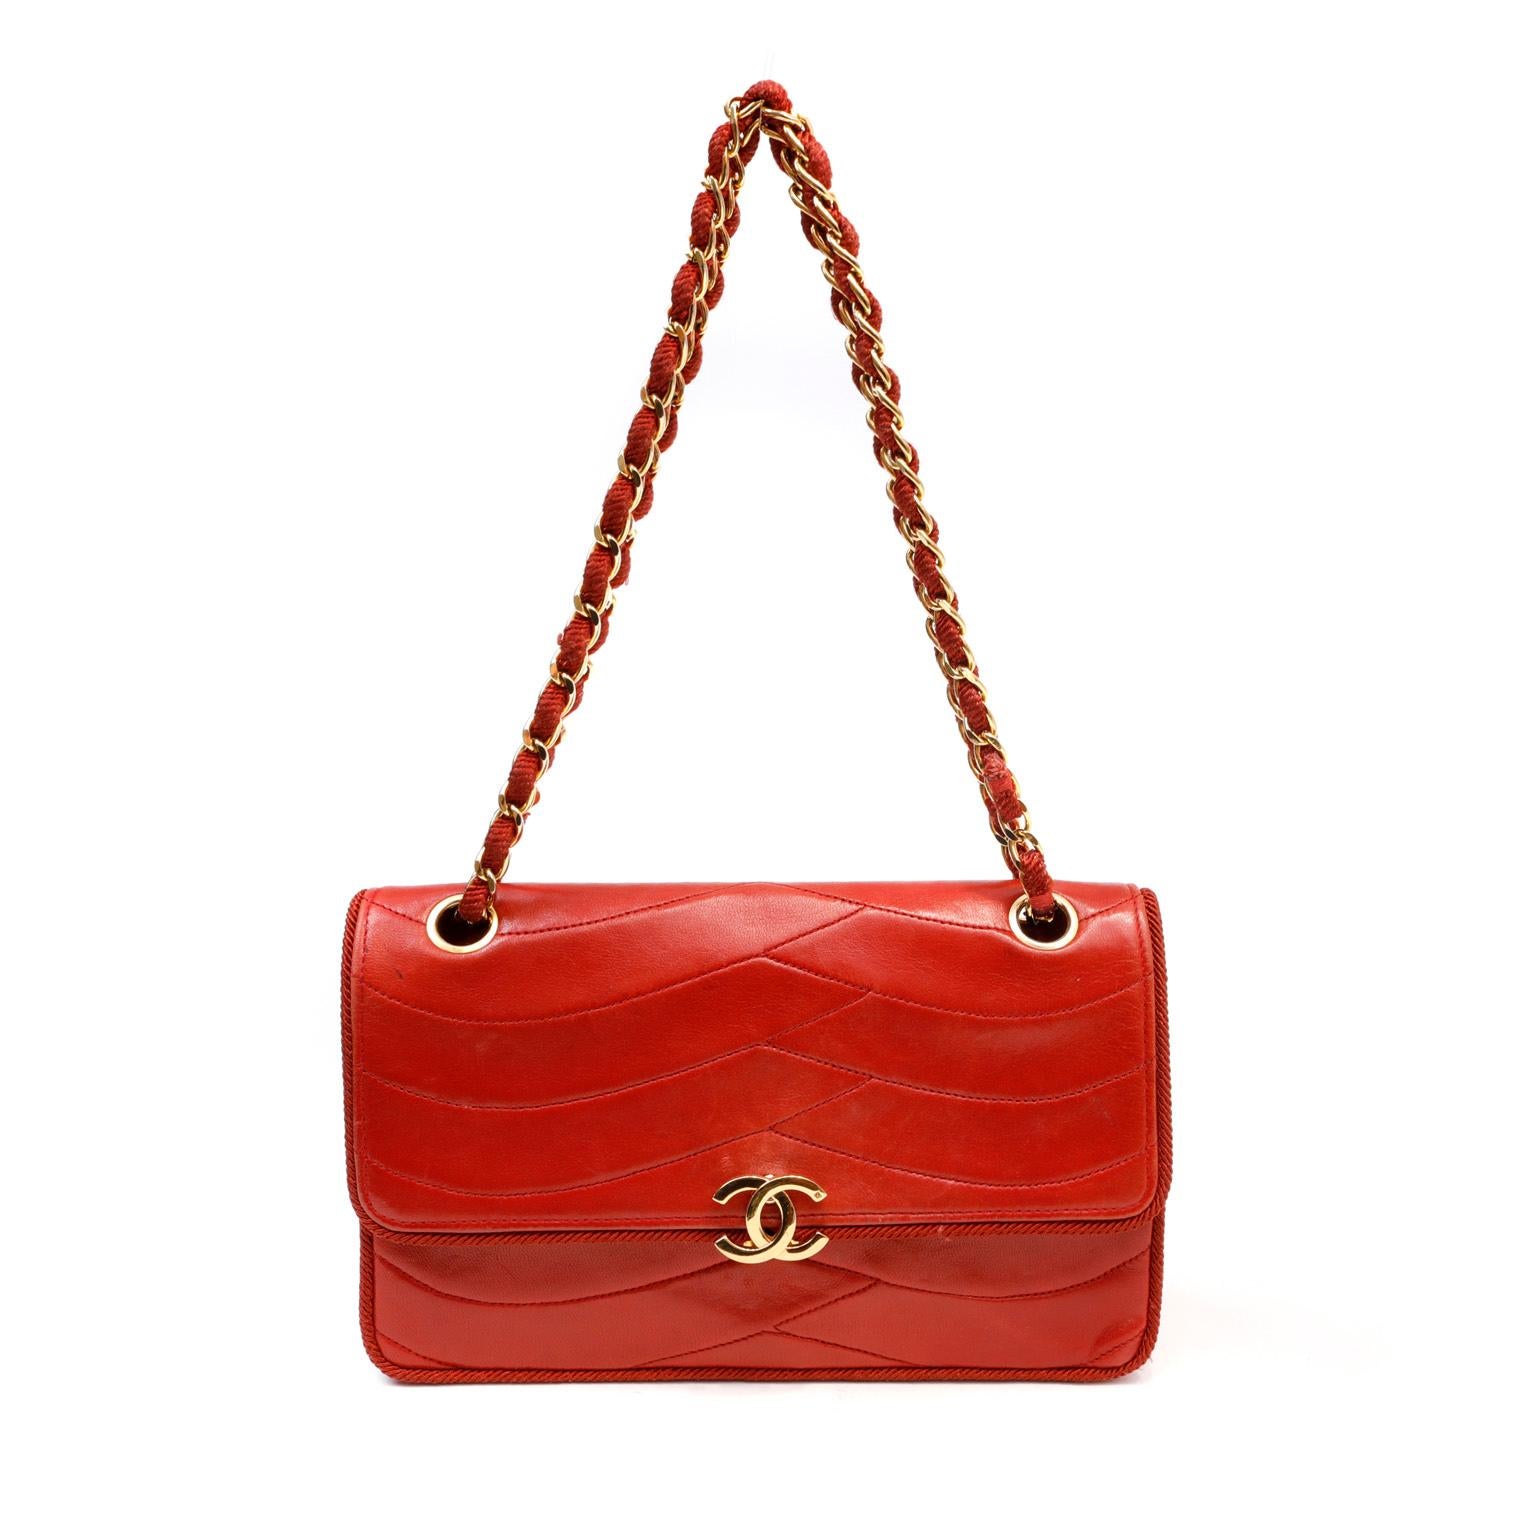 Chanel Vintage Red Leather Scallop Quilted Flap Bag  For Sale 2